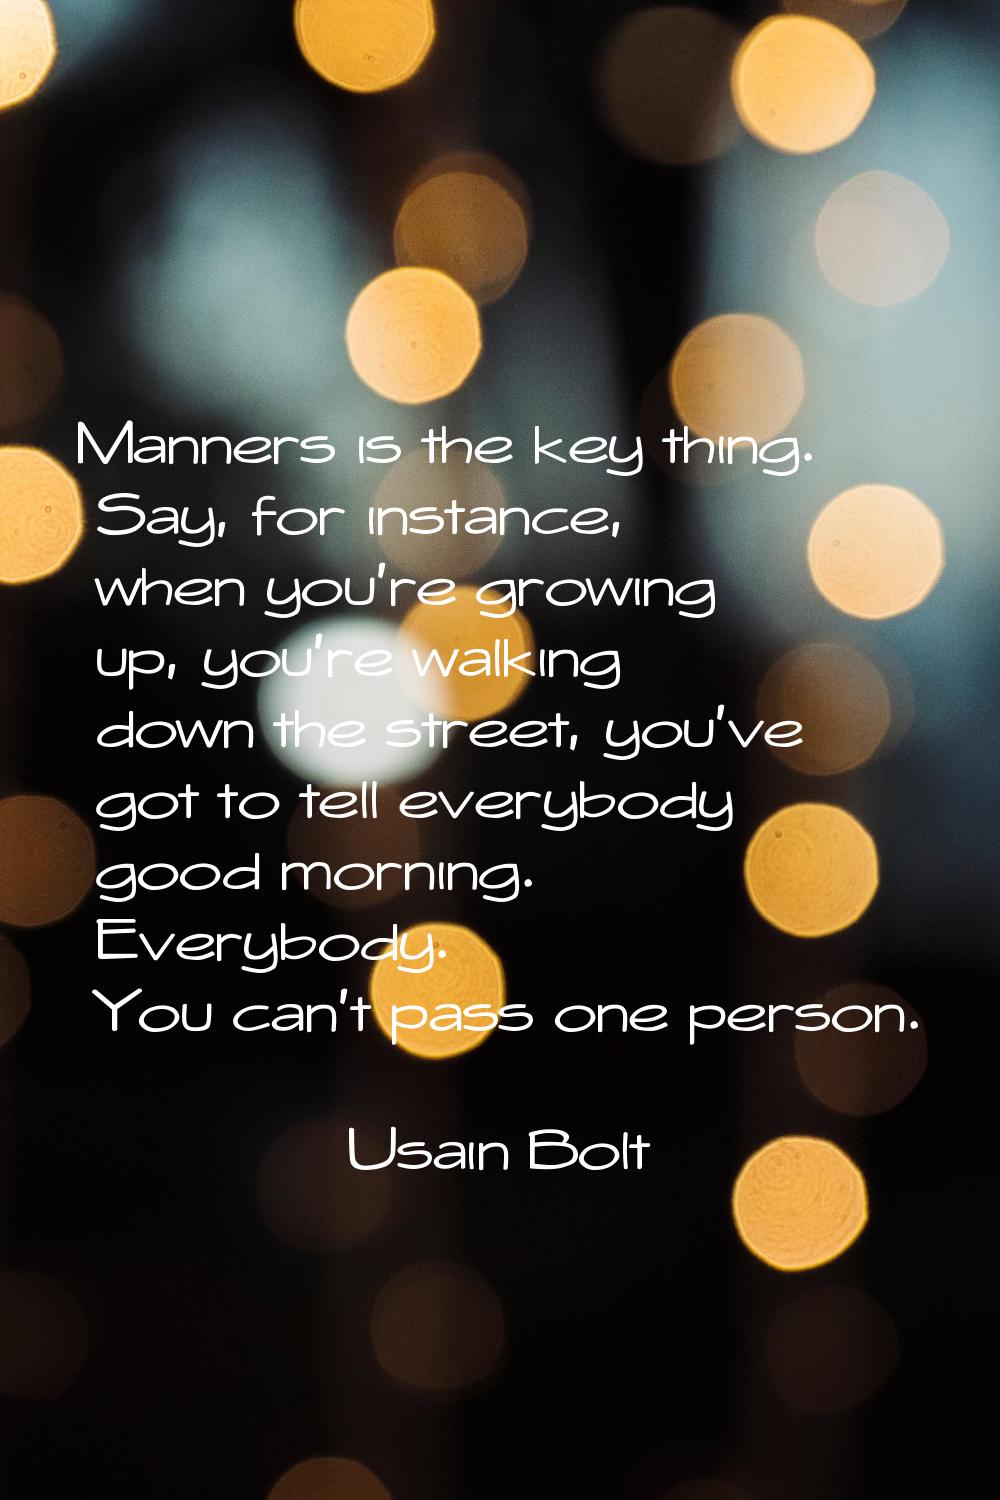 Manners is the key thing. Say, for instance, when you're growing up, you're walking down the street